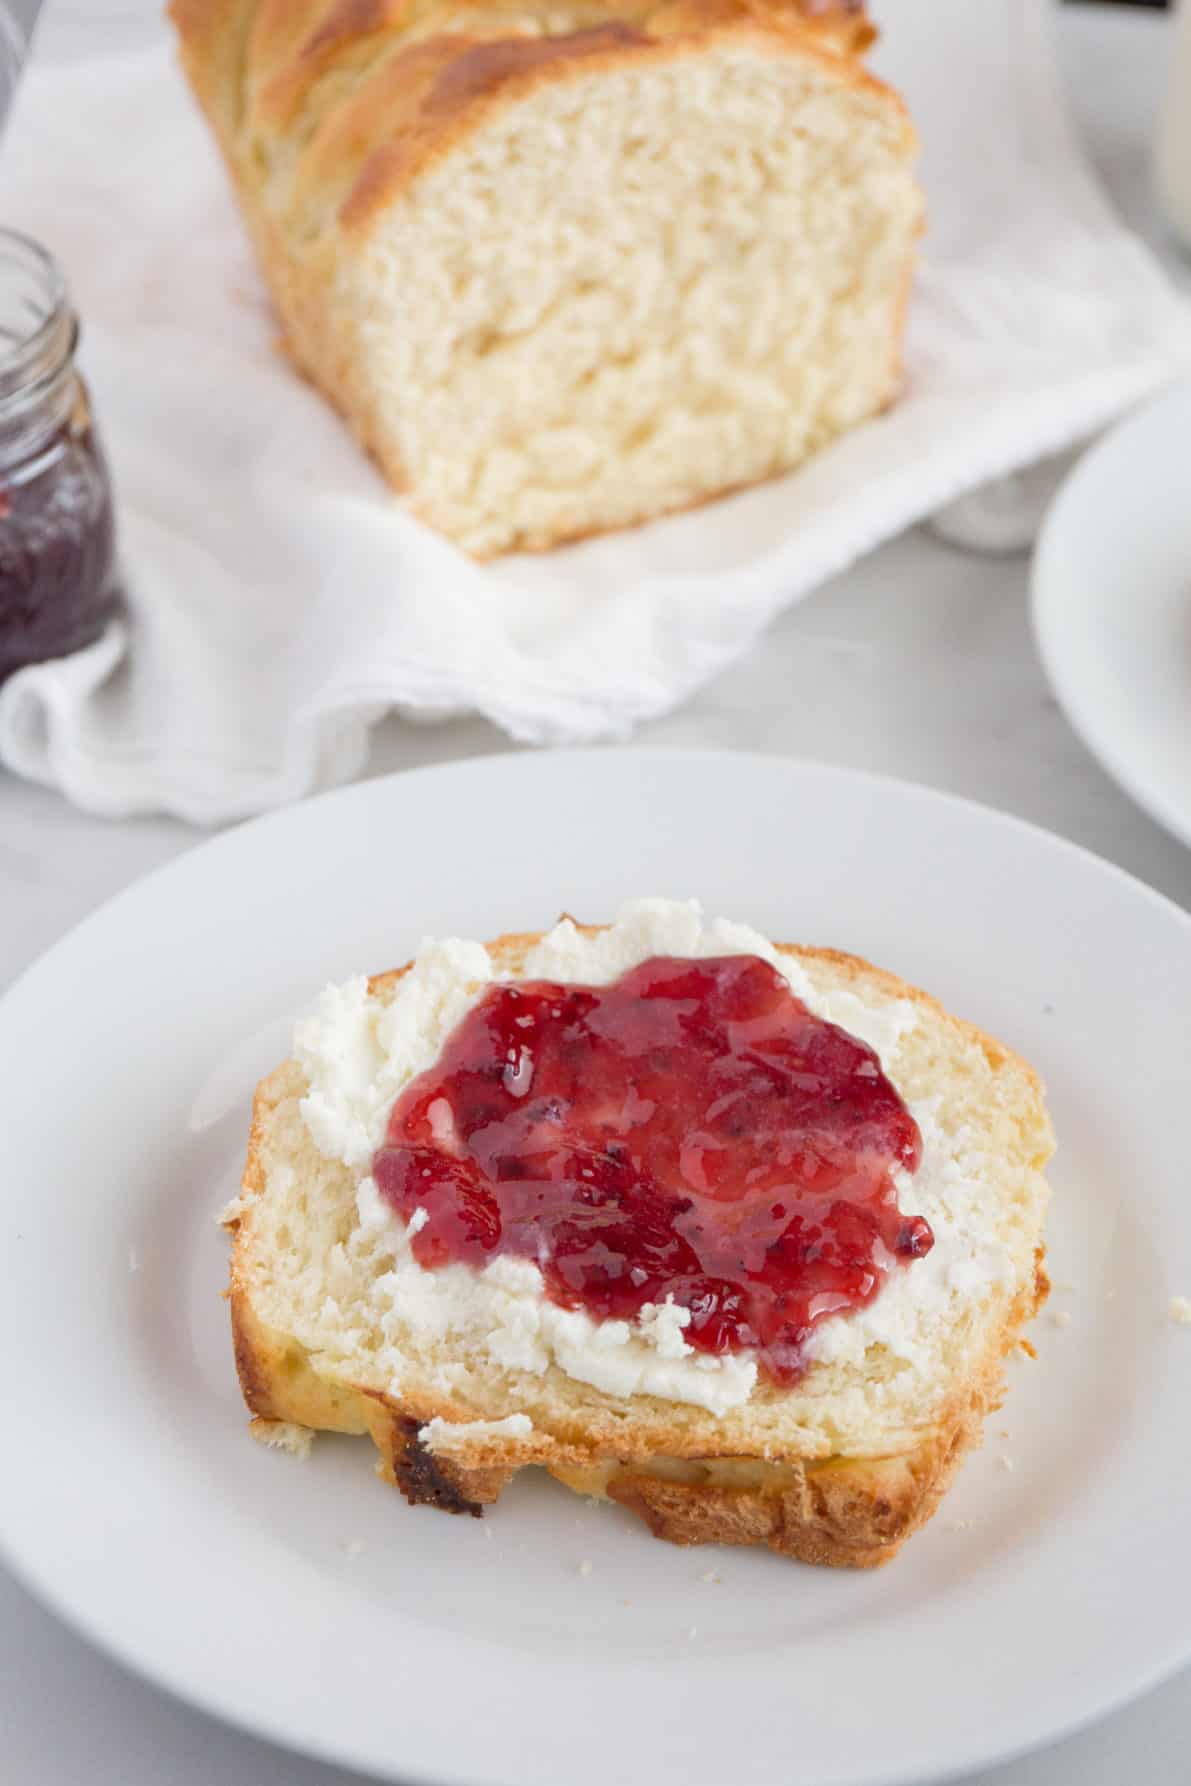 Slice of Brioche Bread topped with ricotta and jam.